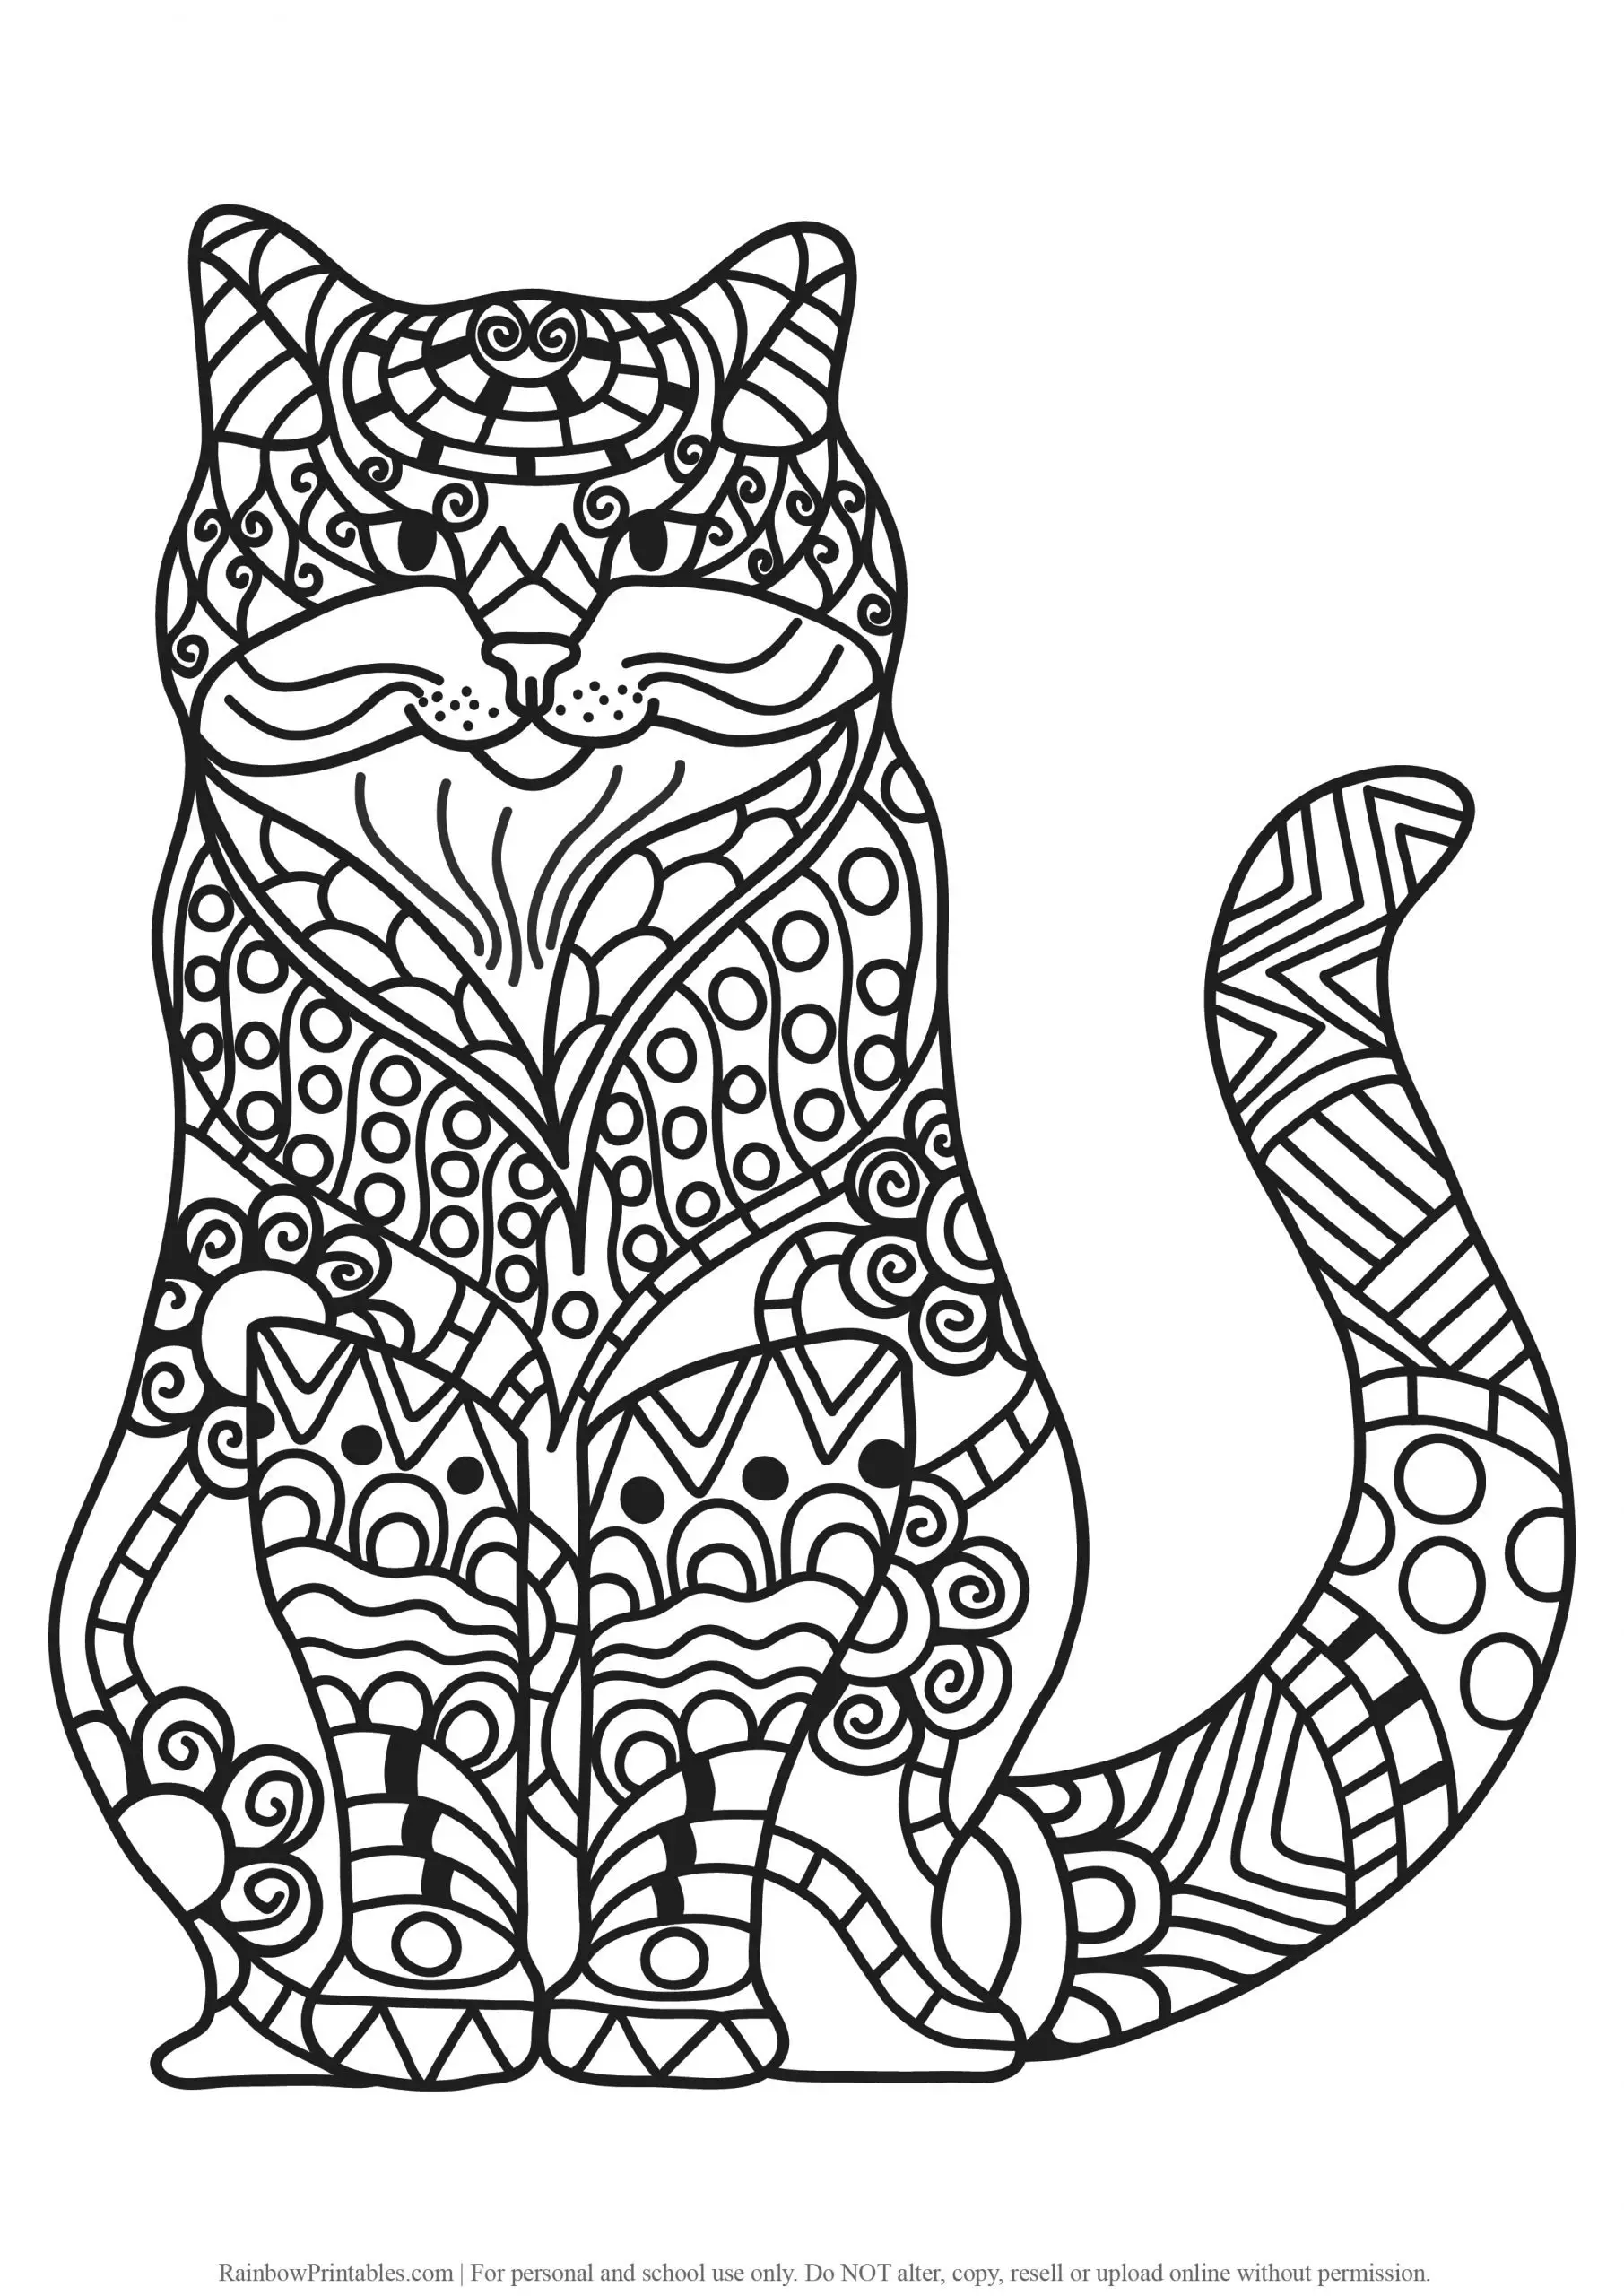 20 Free Mosaic Kitty Cat Coloring Pages for Kids & Adults Anti ...